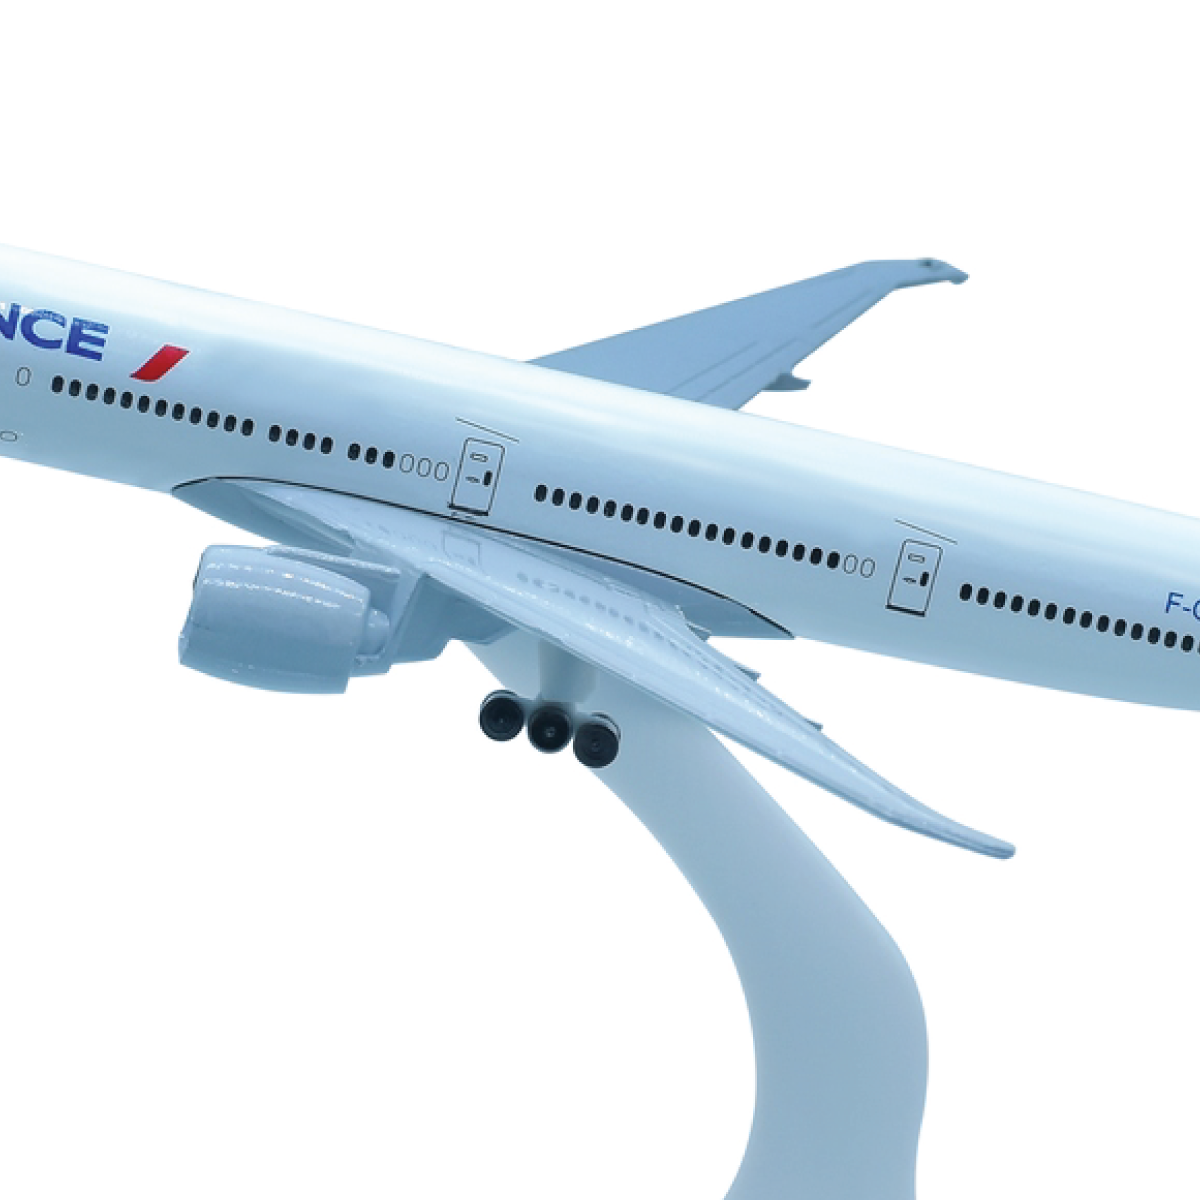 Aircraft Model Big Air France - For Office Use, Personal Use, or Corporate Gifting-JA